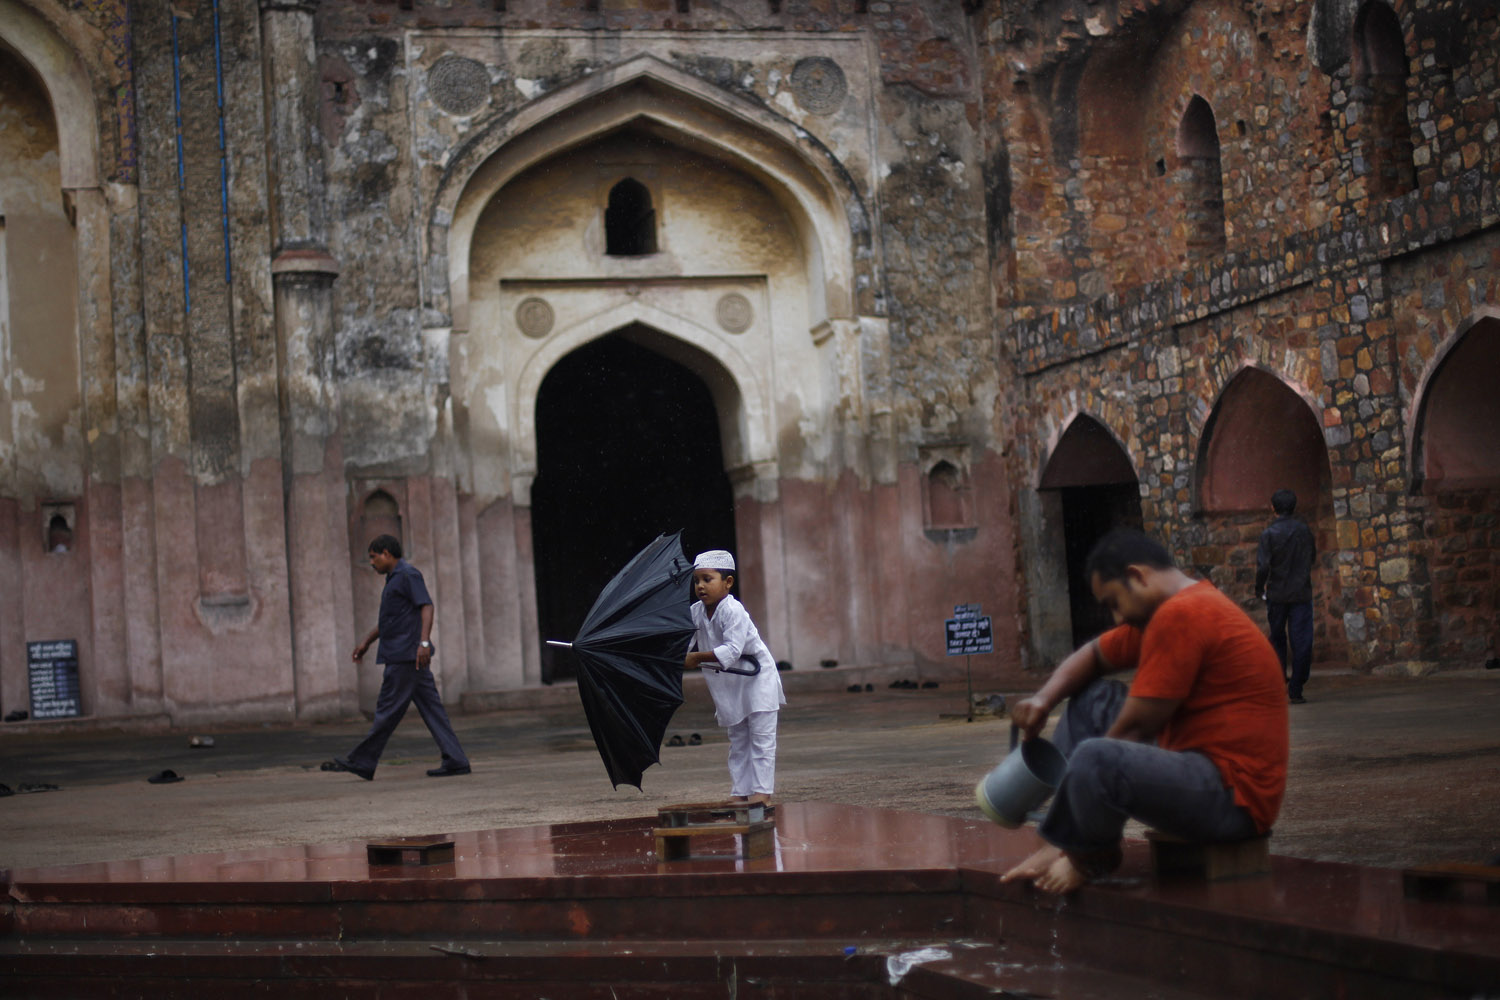 July 12, 2013. A young Indian Muslim boy tries to fold an umbrella on the first Friday of the holy month of Ramadan at an old Mughal era mosque in New Delhi.